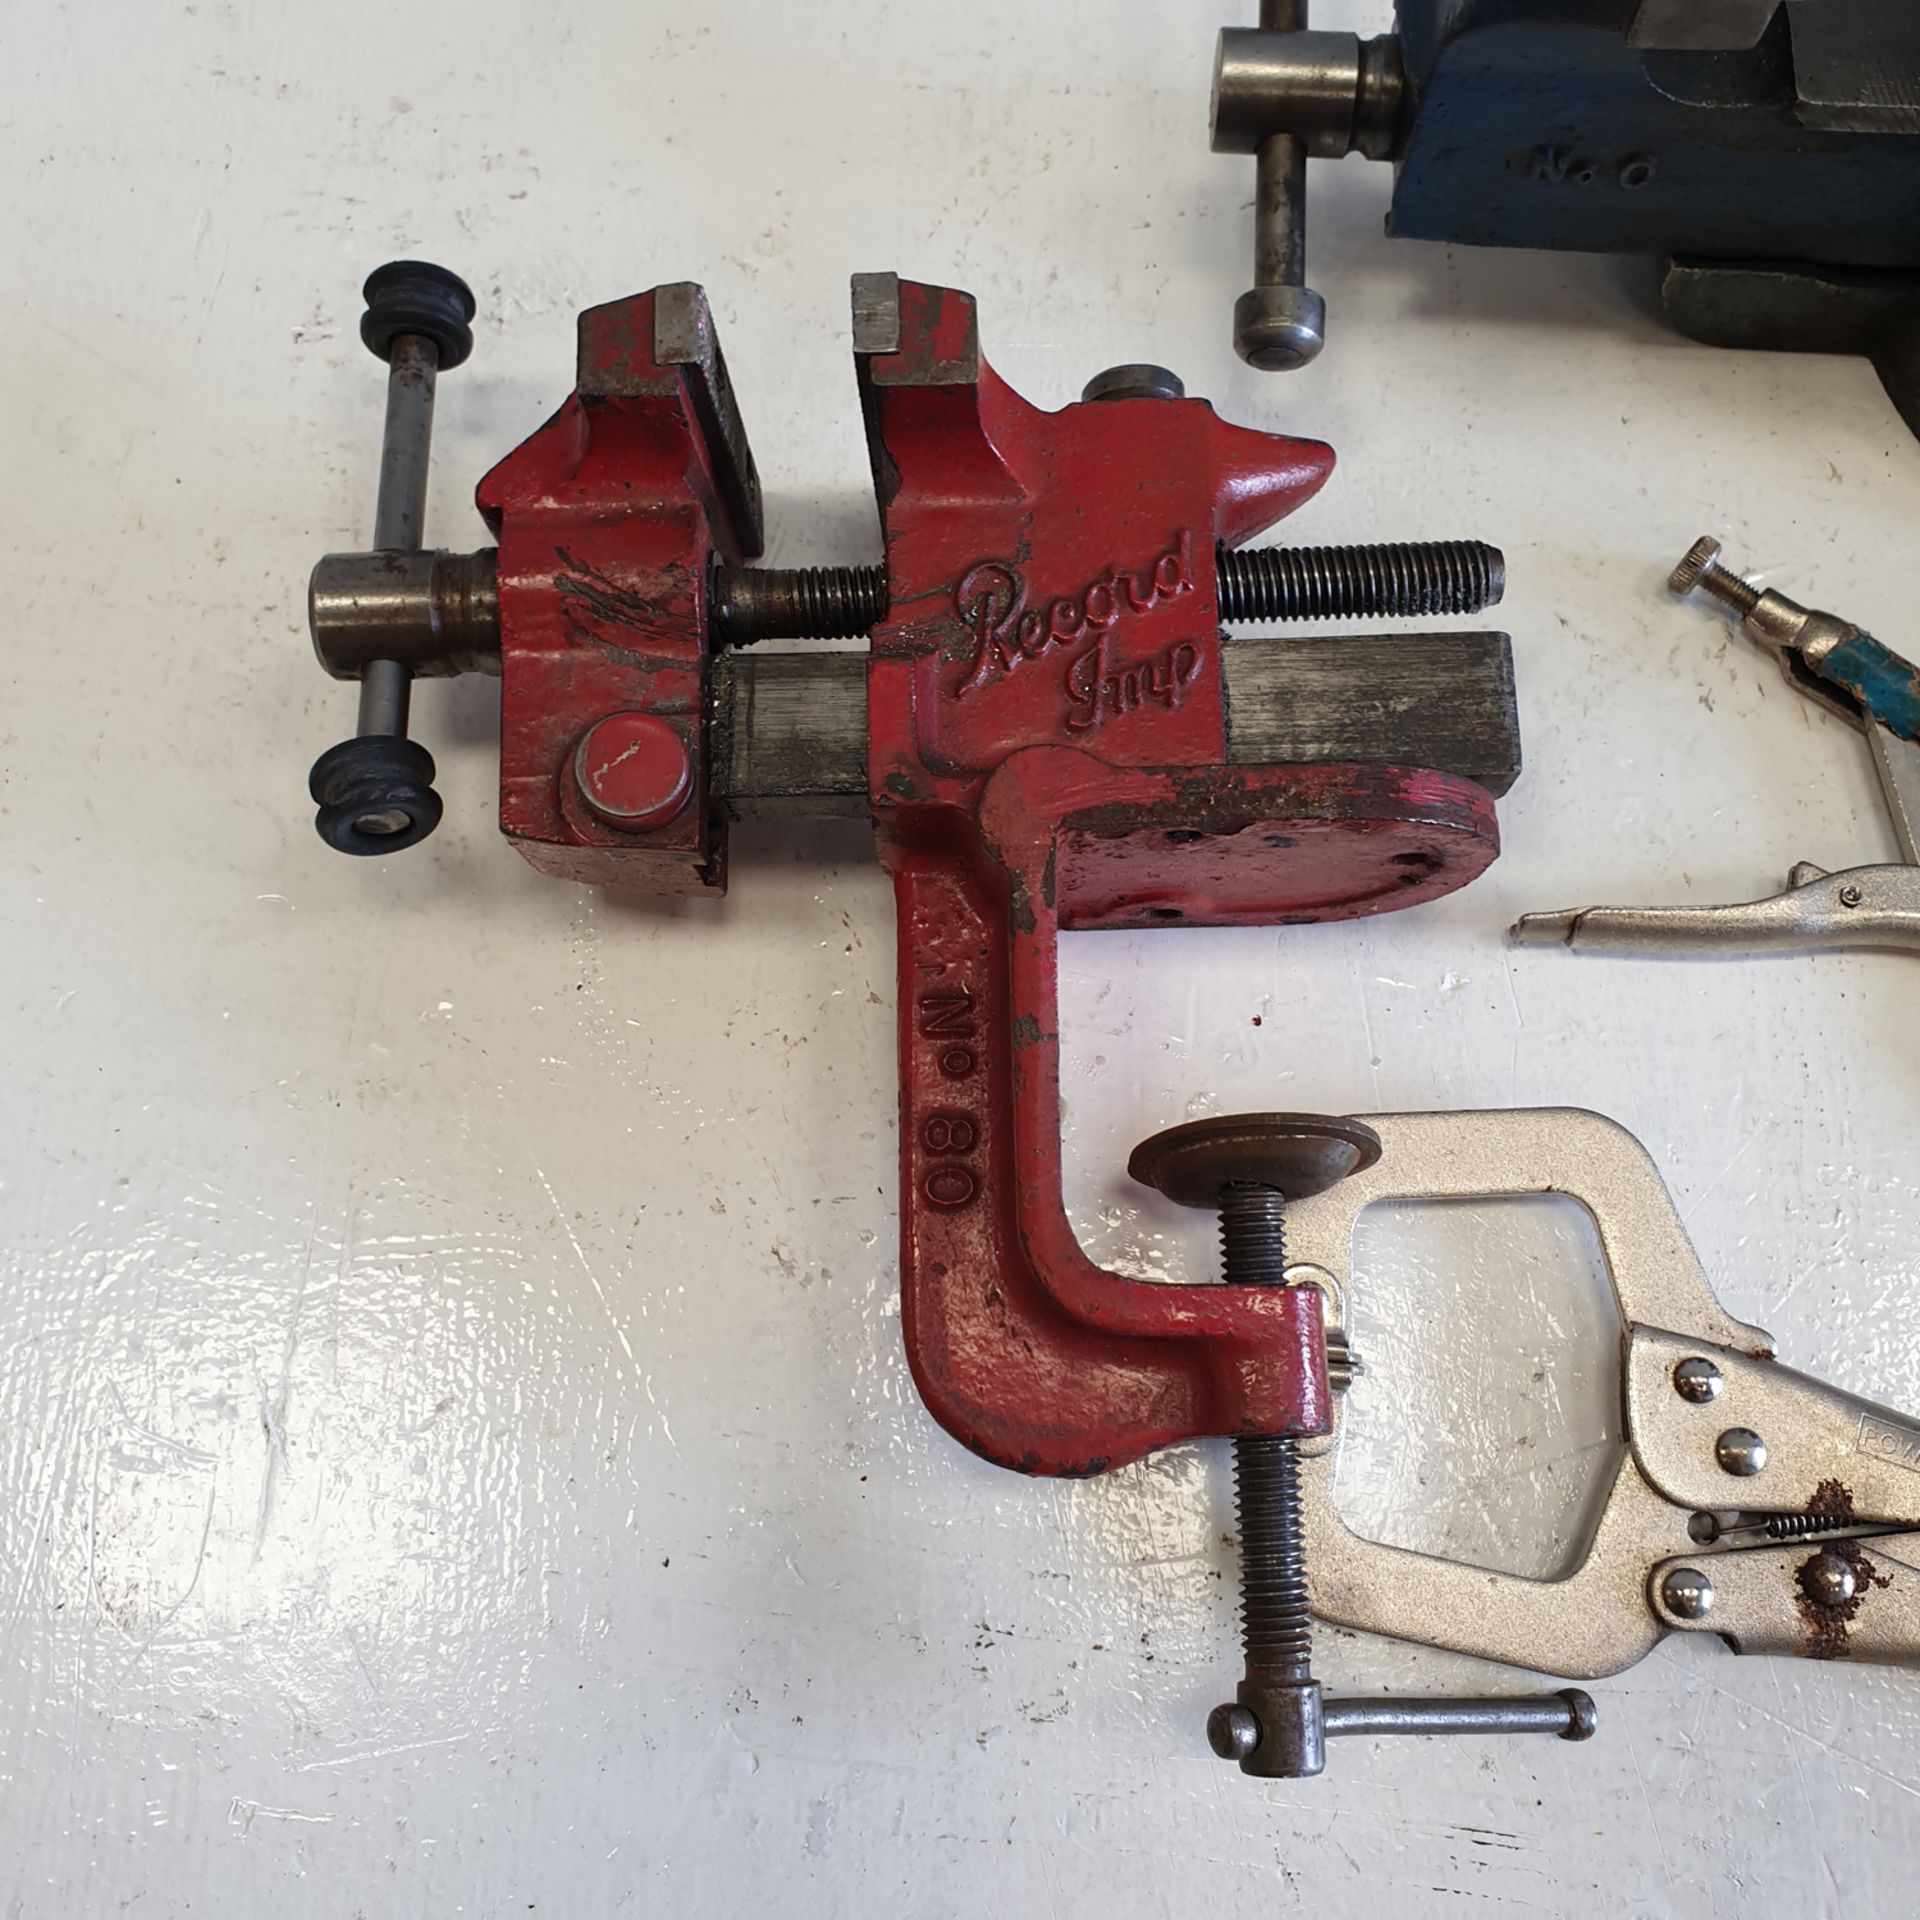 Selection of Bench Vices and C Clamp Grip Wrenches. - Image 2 of 6